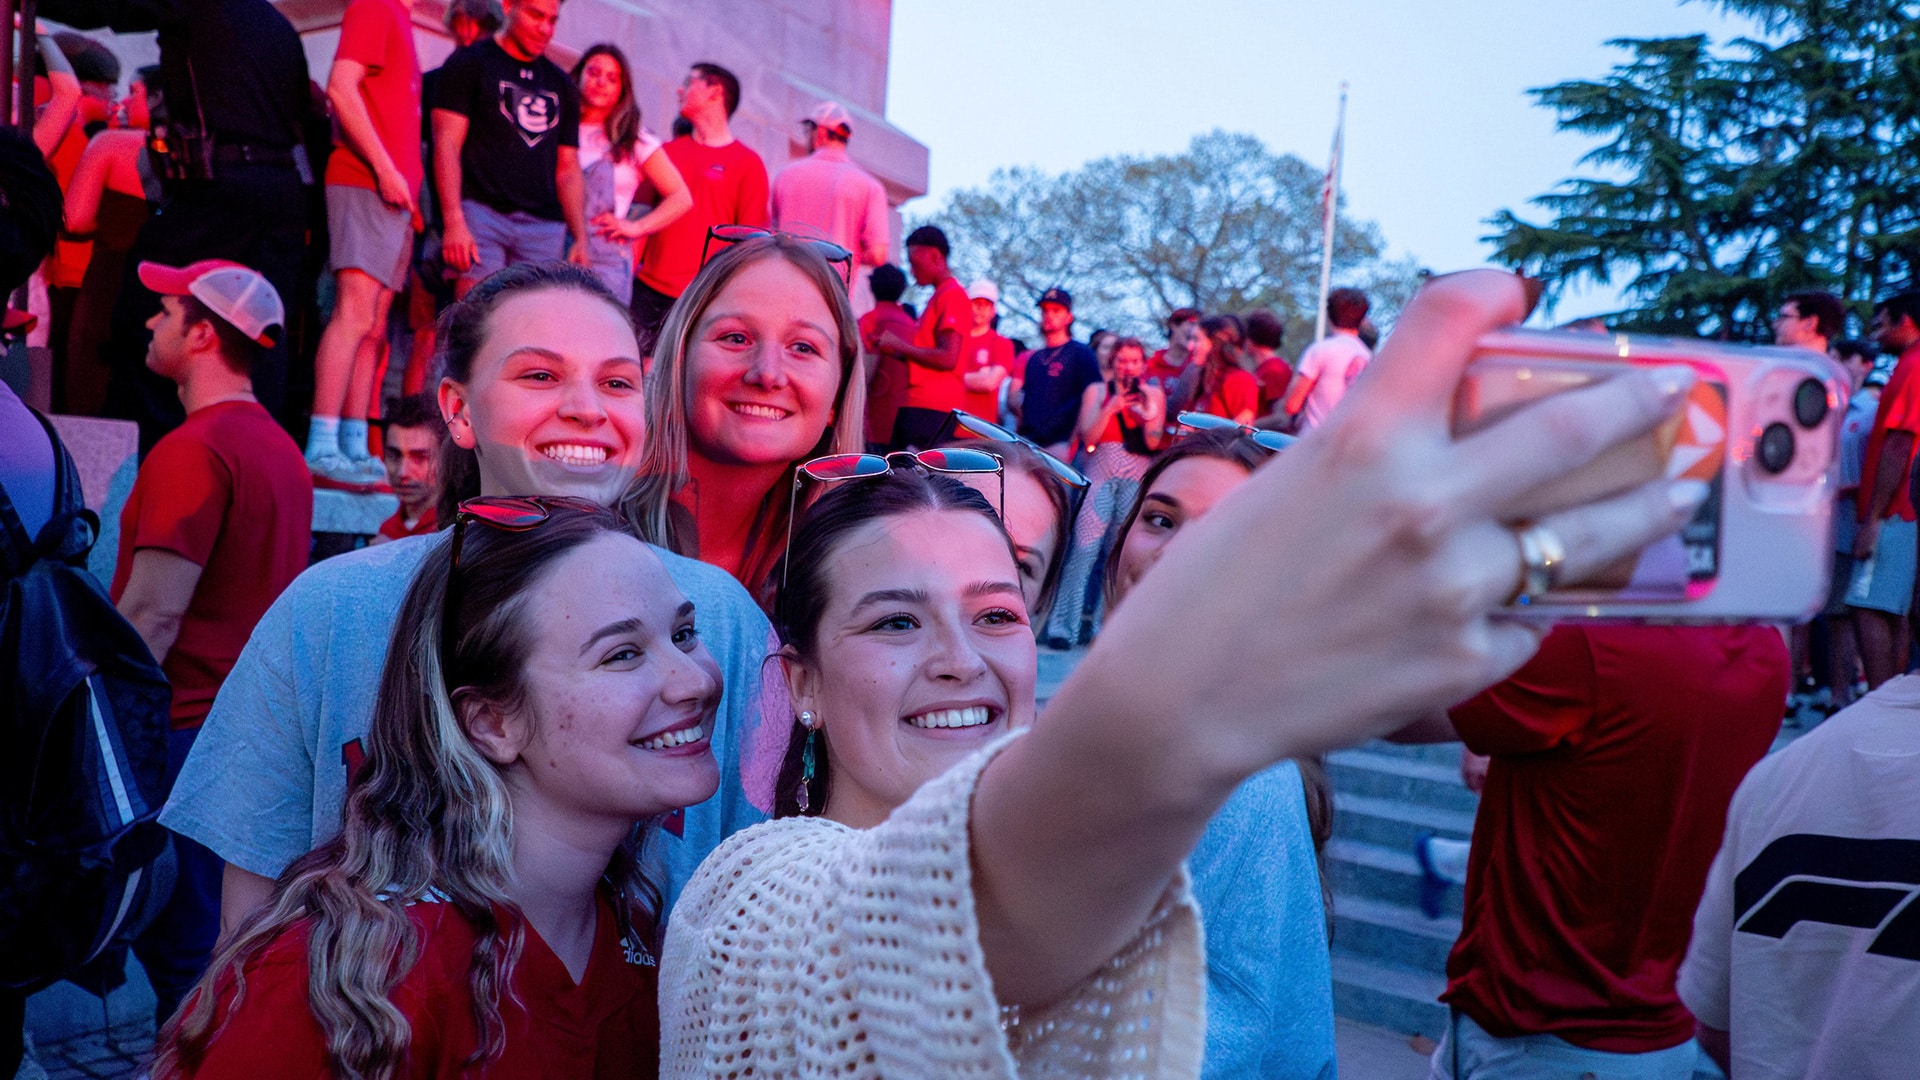 Students snap a selfie at the Memorial Belltower during March Madness celebrations.